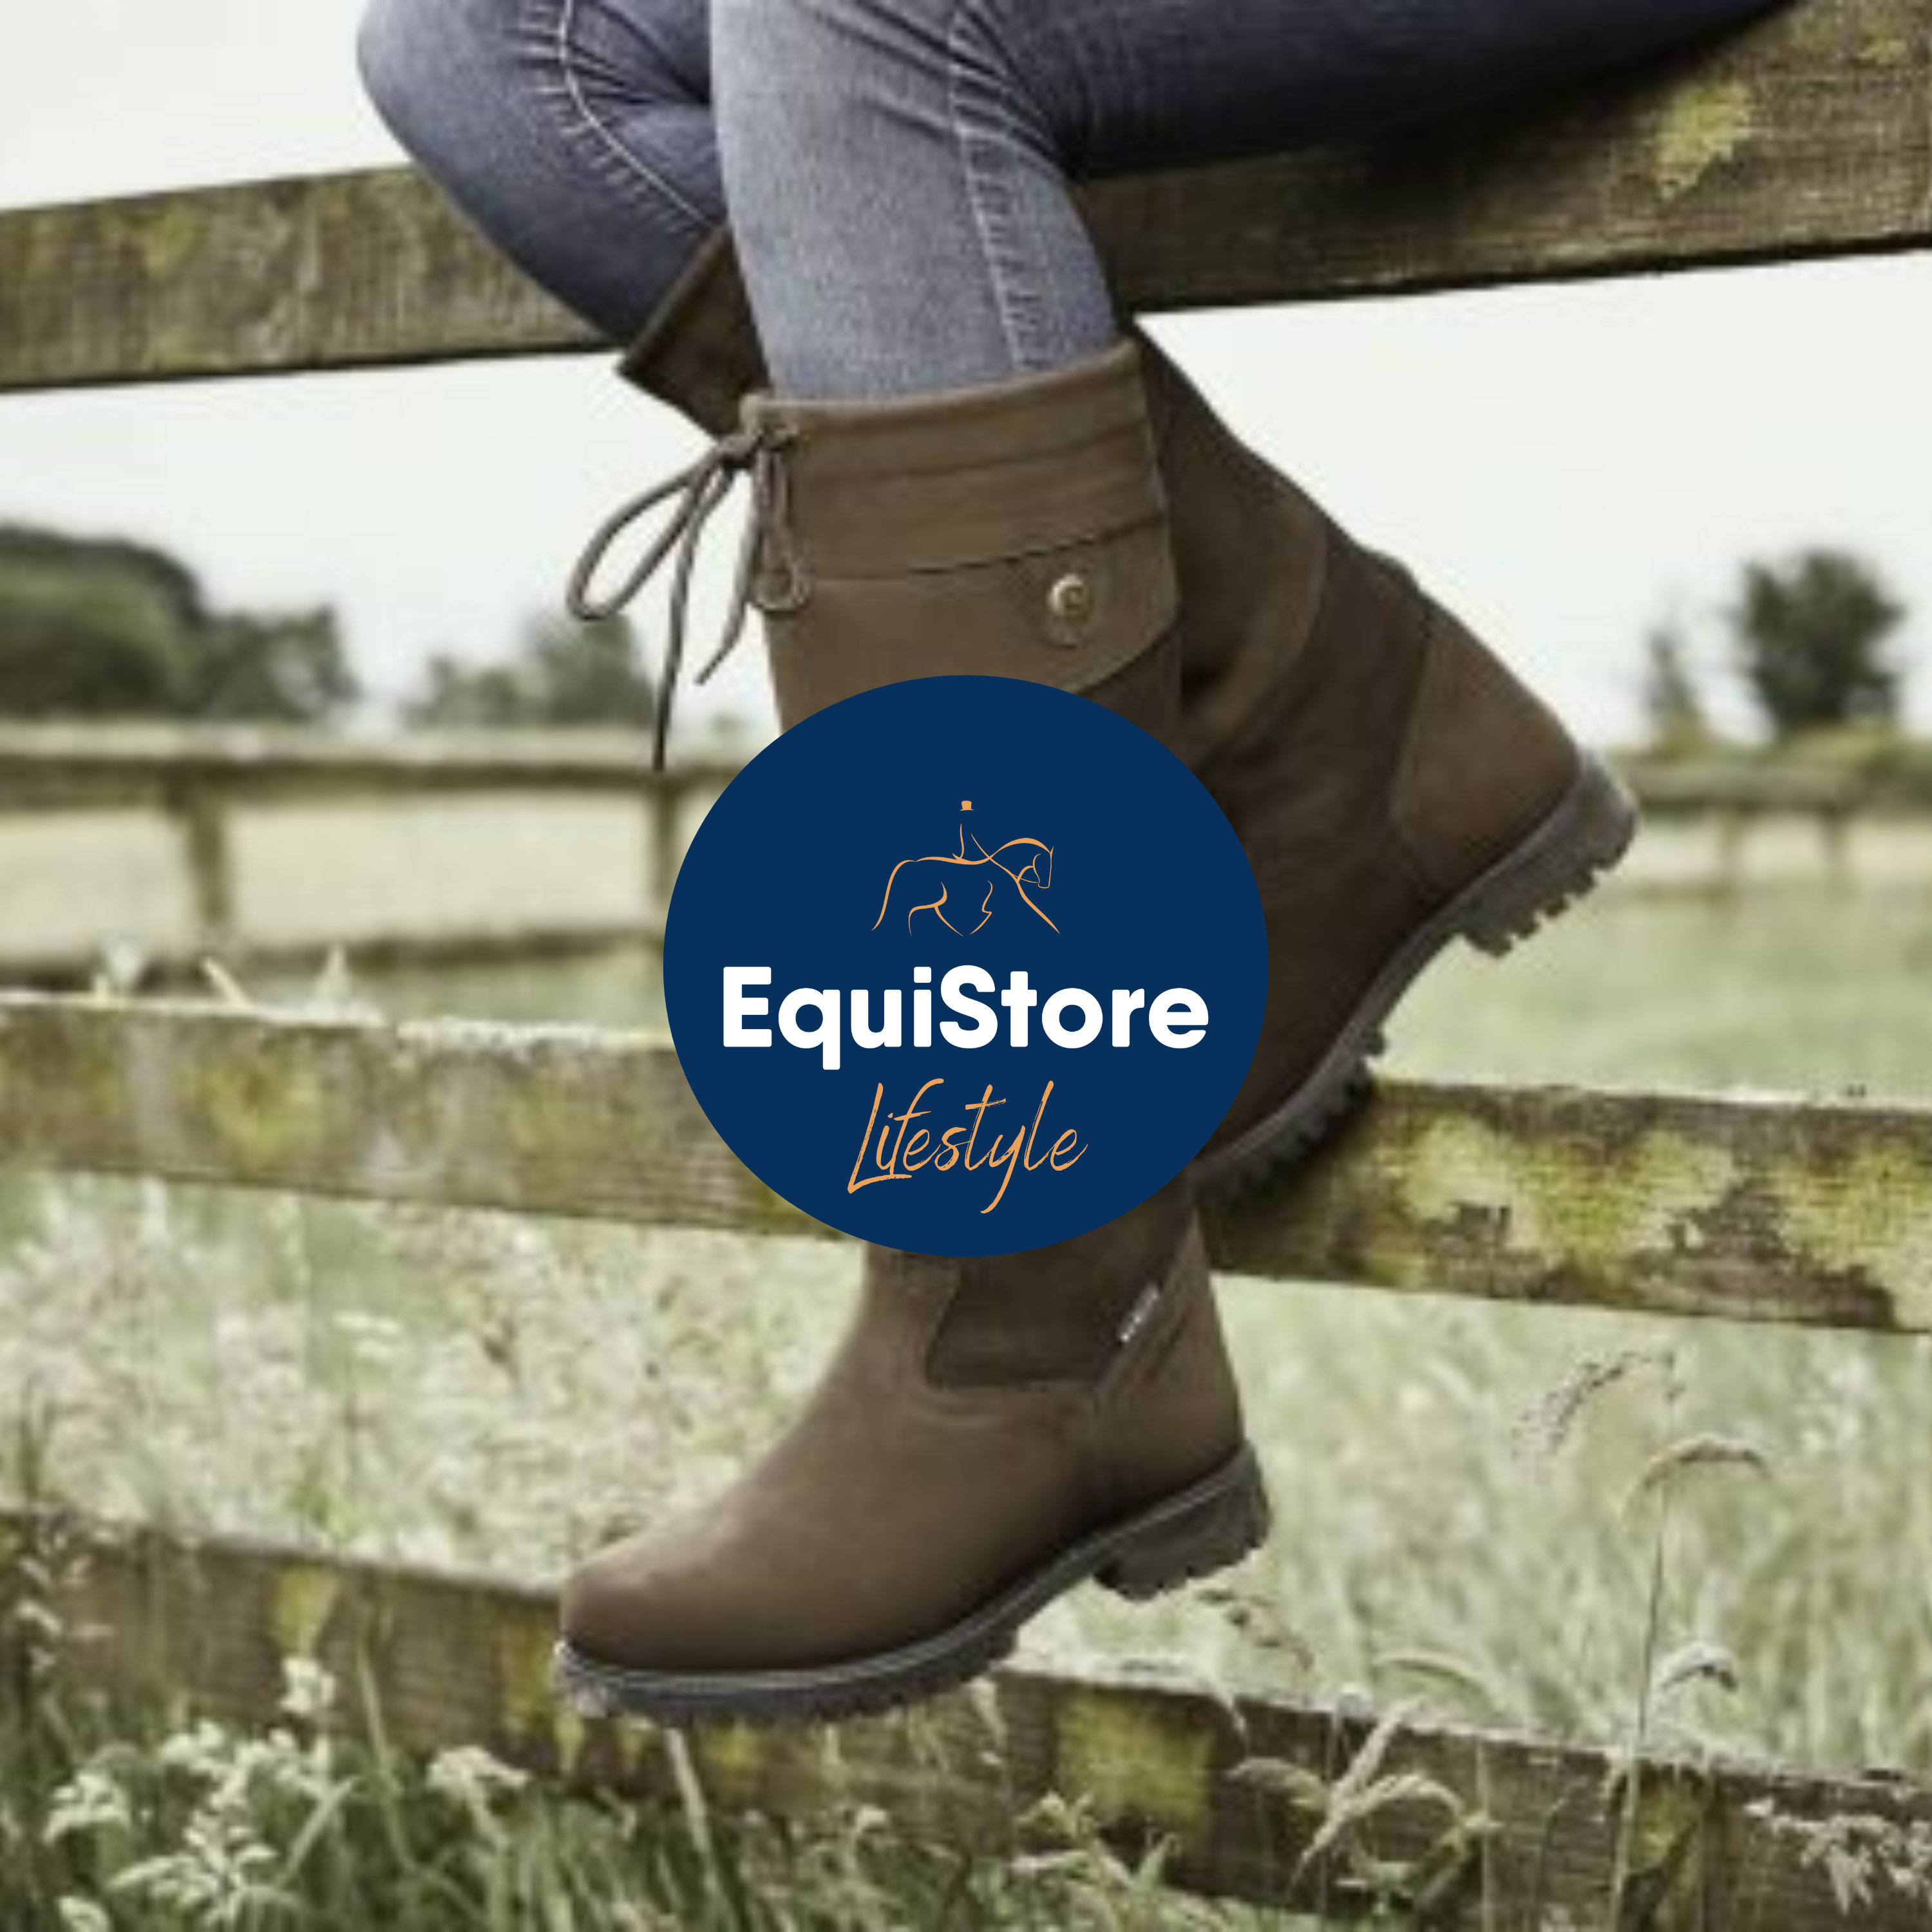 A lovely selection of country and equestrian lifestyle products, apparel and gifts. Available in Ireland from Equistore.